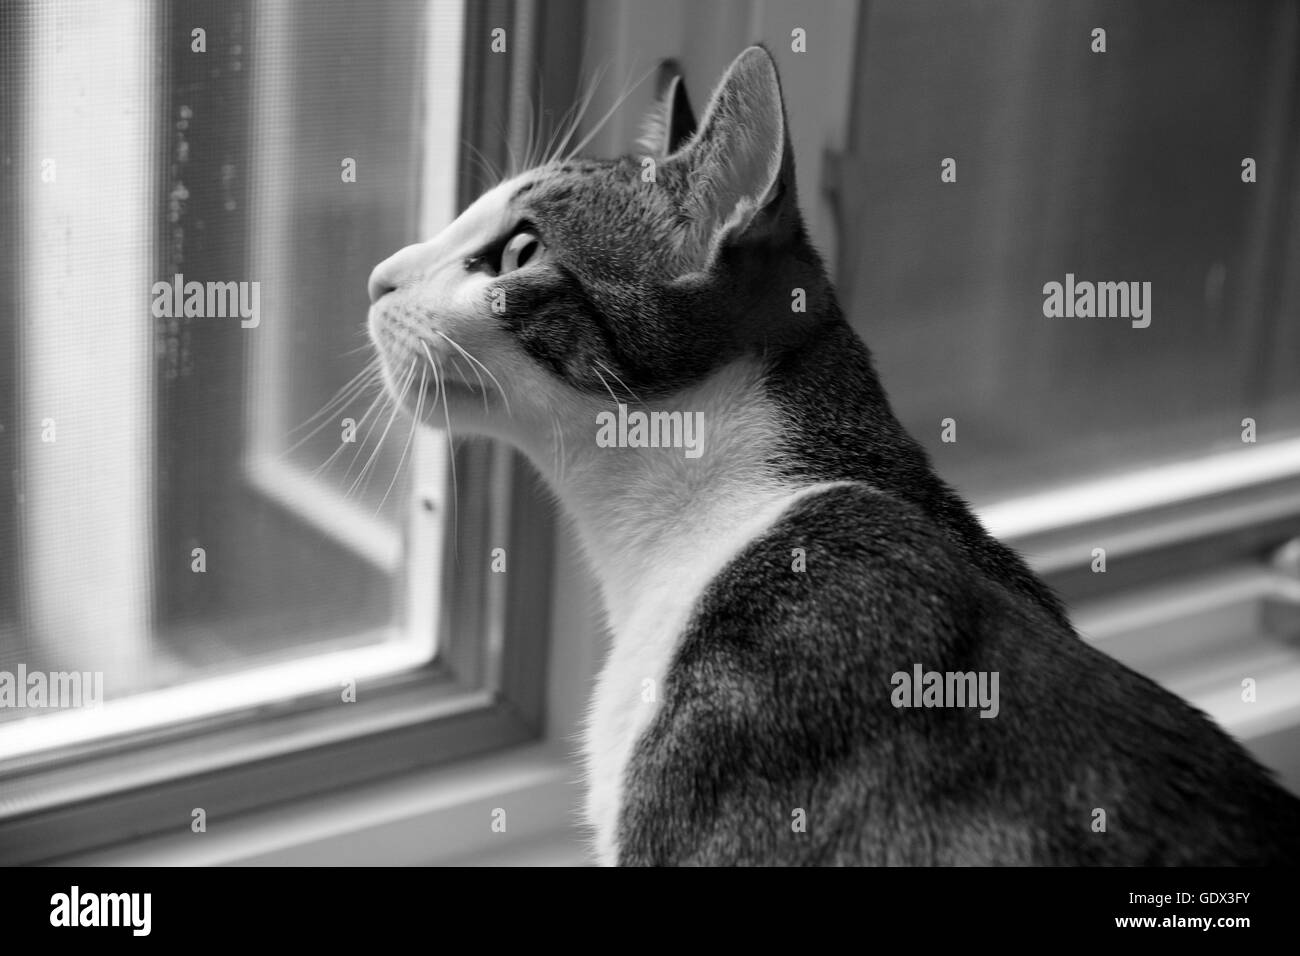 Black and white photograph of a pet cat looking out the window. Stock Photo